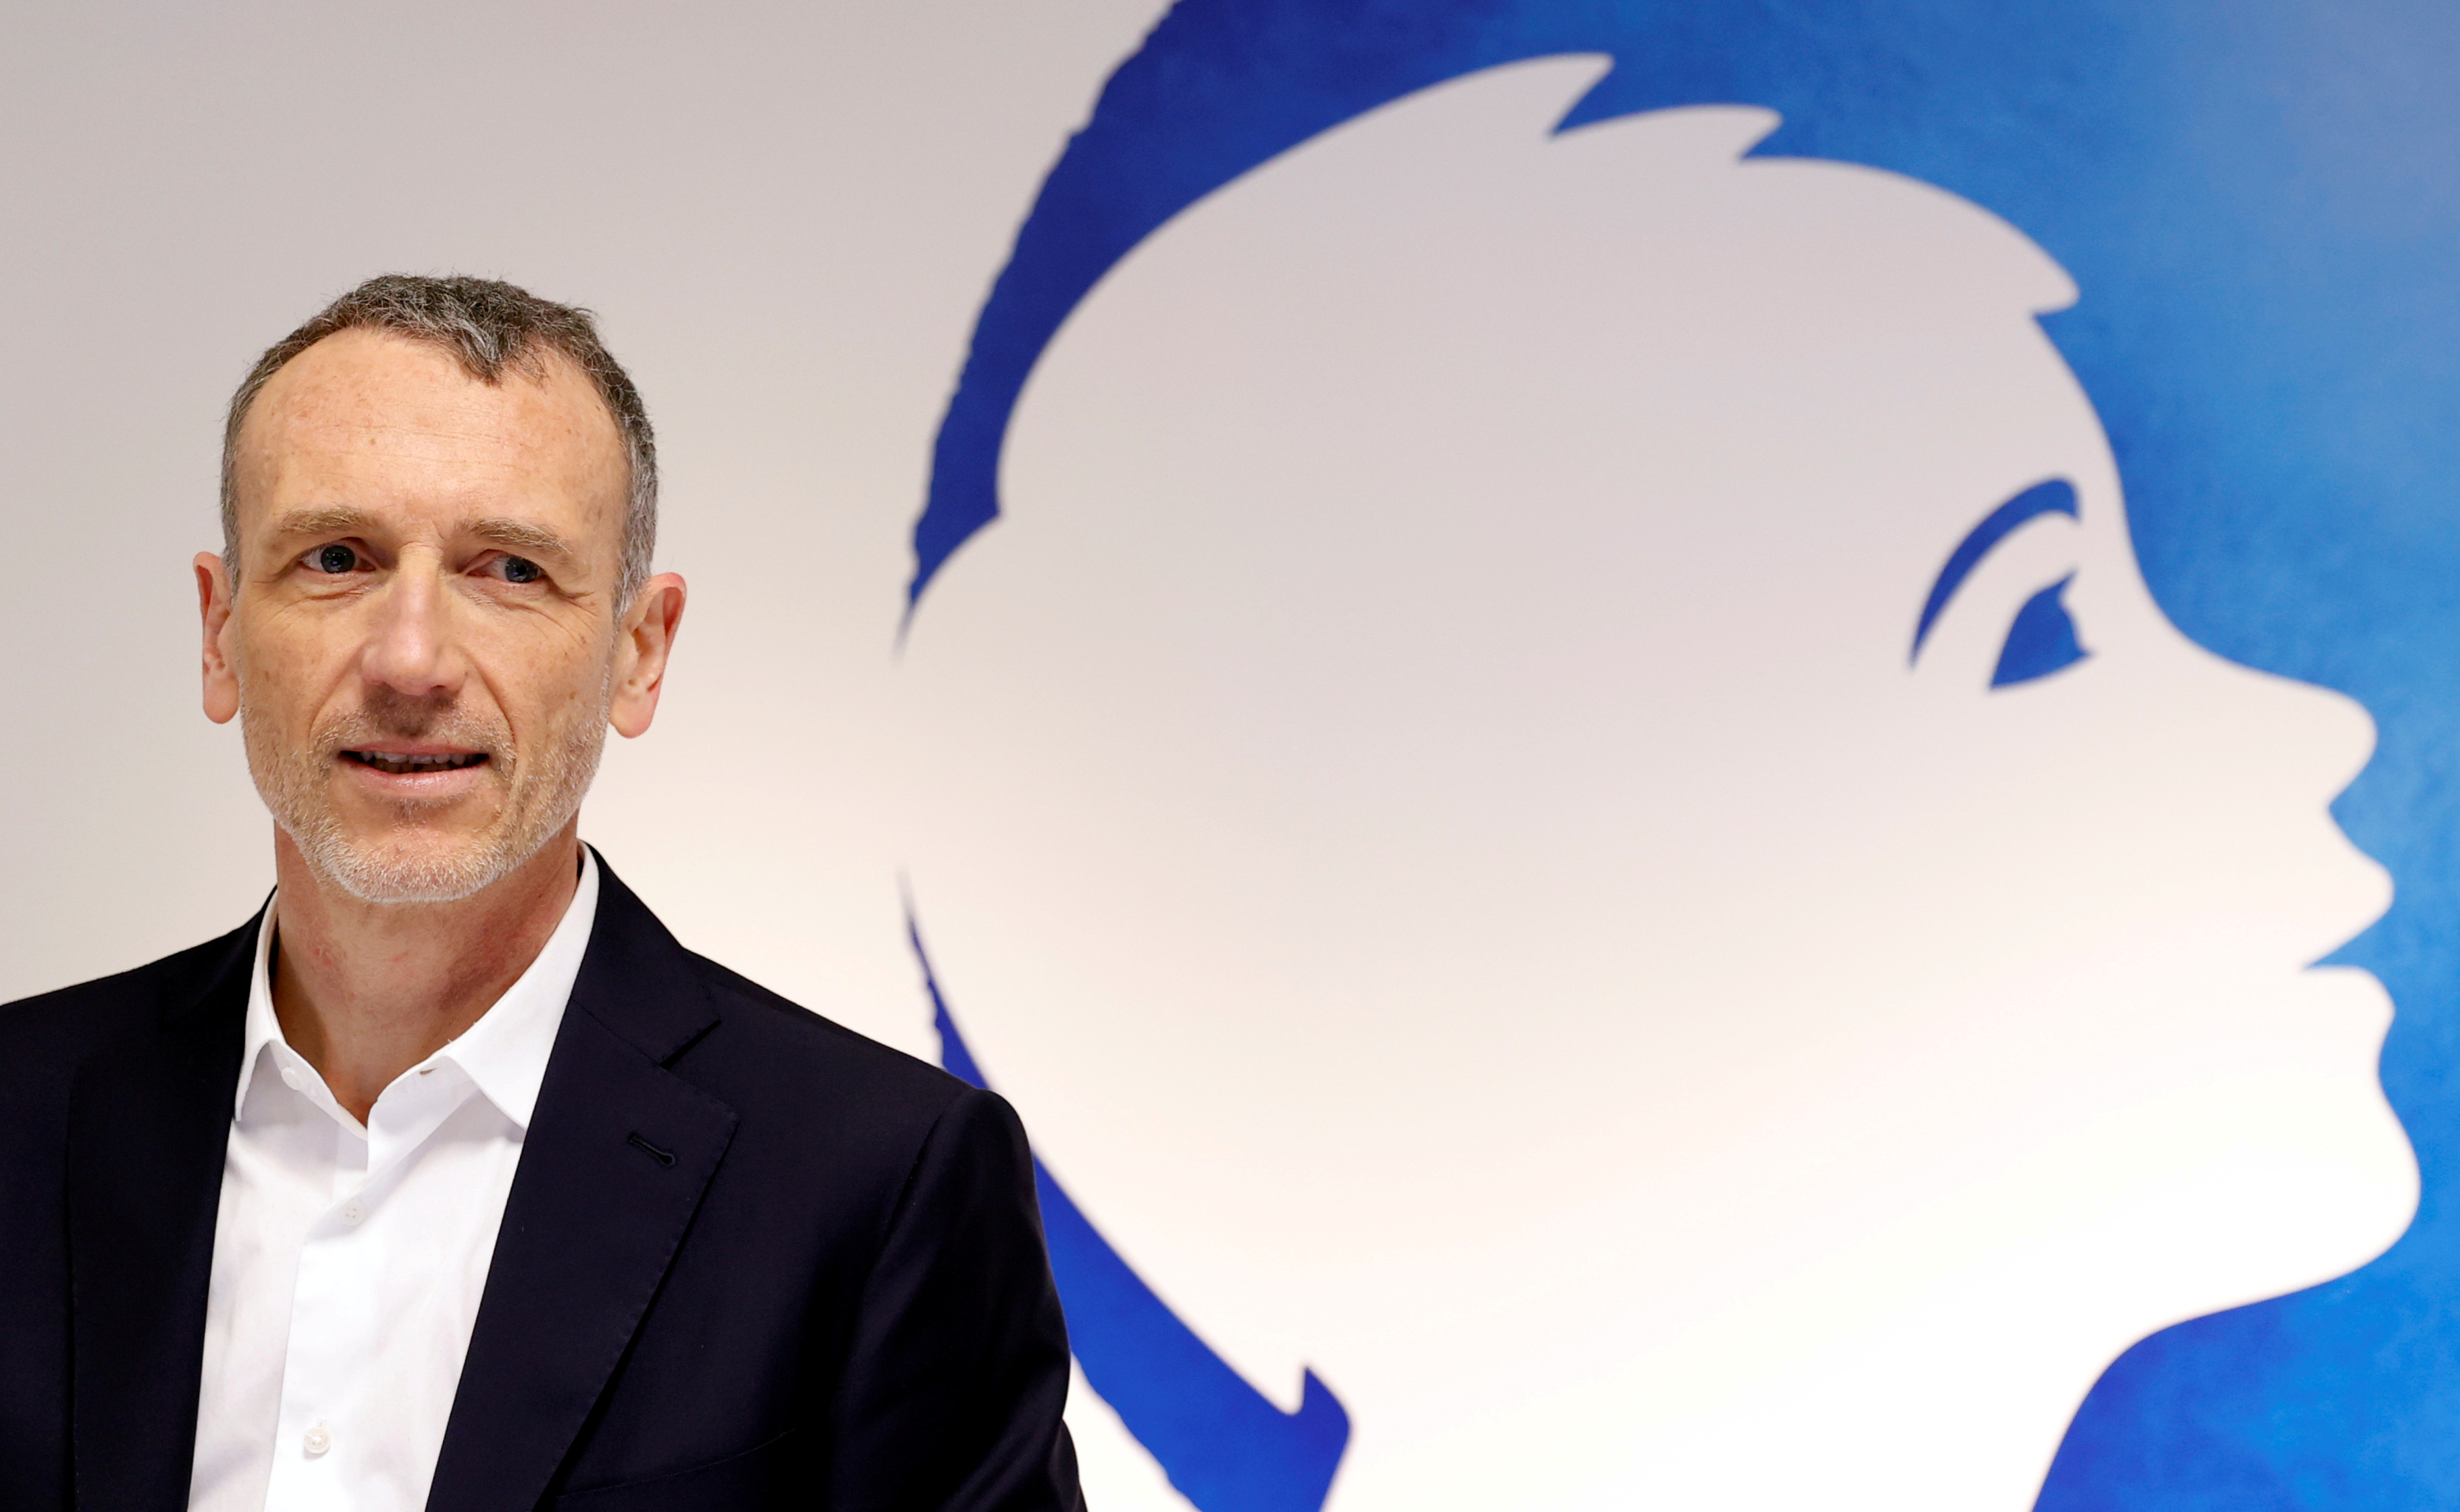 Globisor - PARIS: U.S. investment company Artisan Partners joined activist  investor Bluebell Capital Partners on Friday in demanding that French food  group Danone finds a new chief executive. #globisor #sharemarket  #stockmarkets #globalmarket #